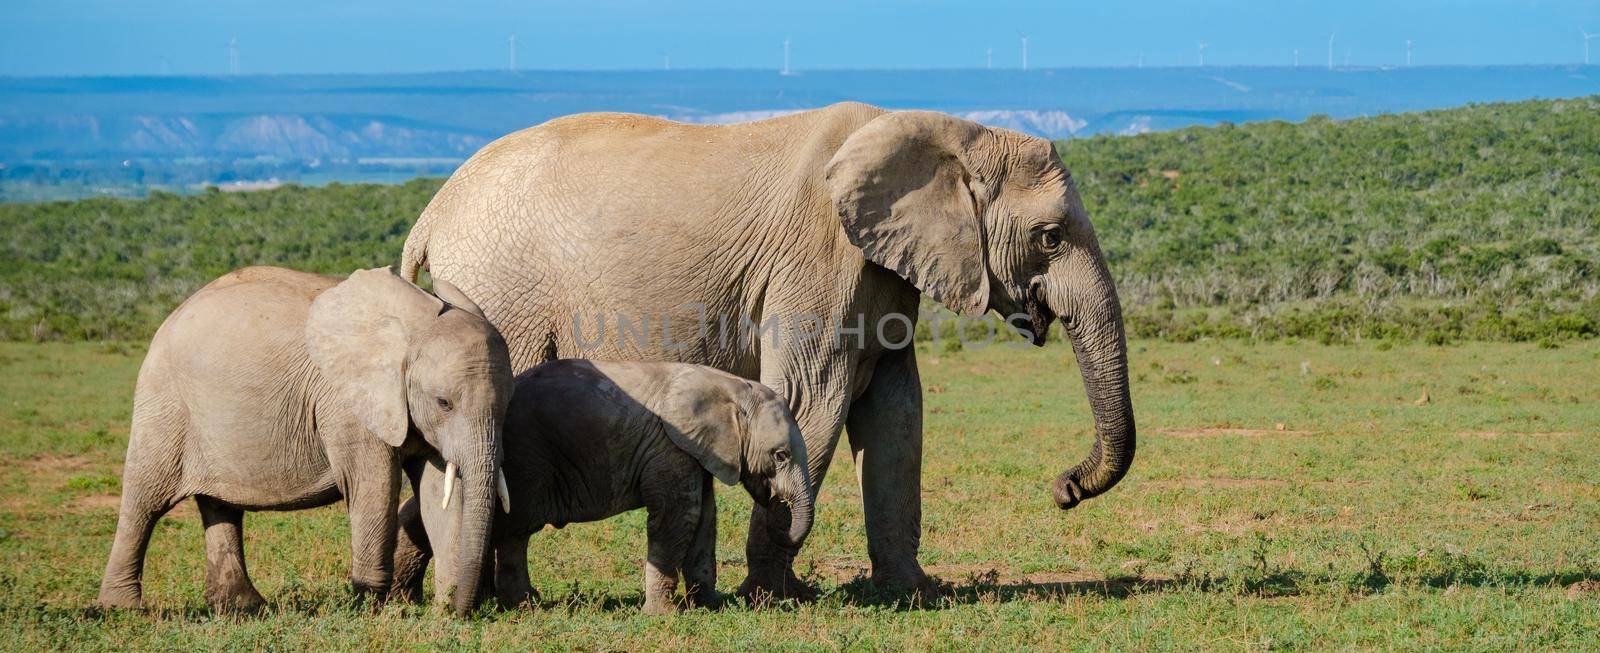 Elephants in South Africa, Family of elephant in Addo elephant park by fokkebok